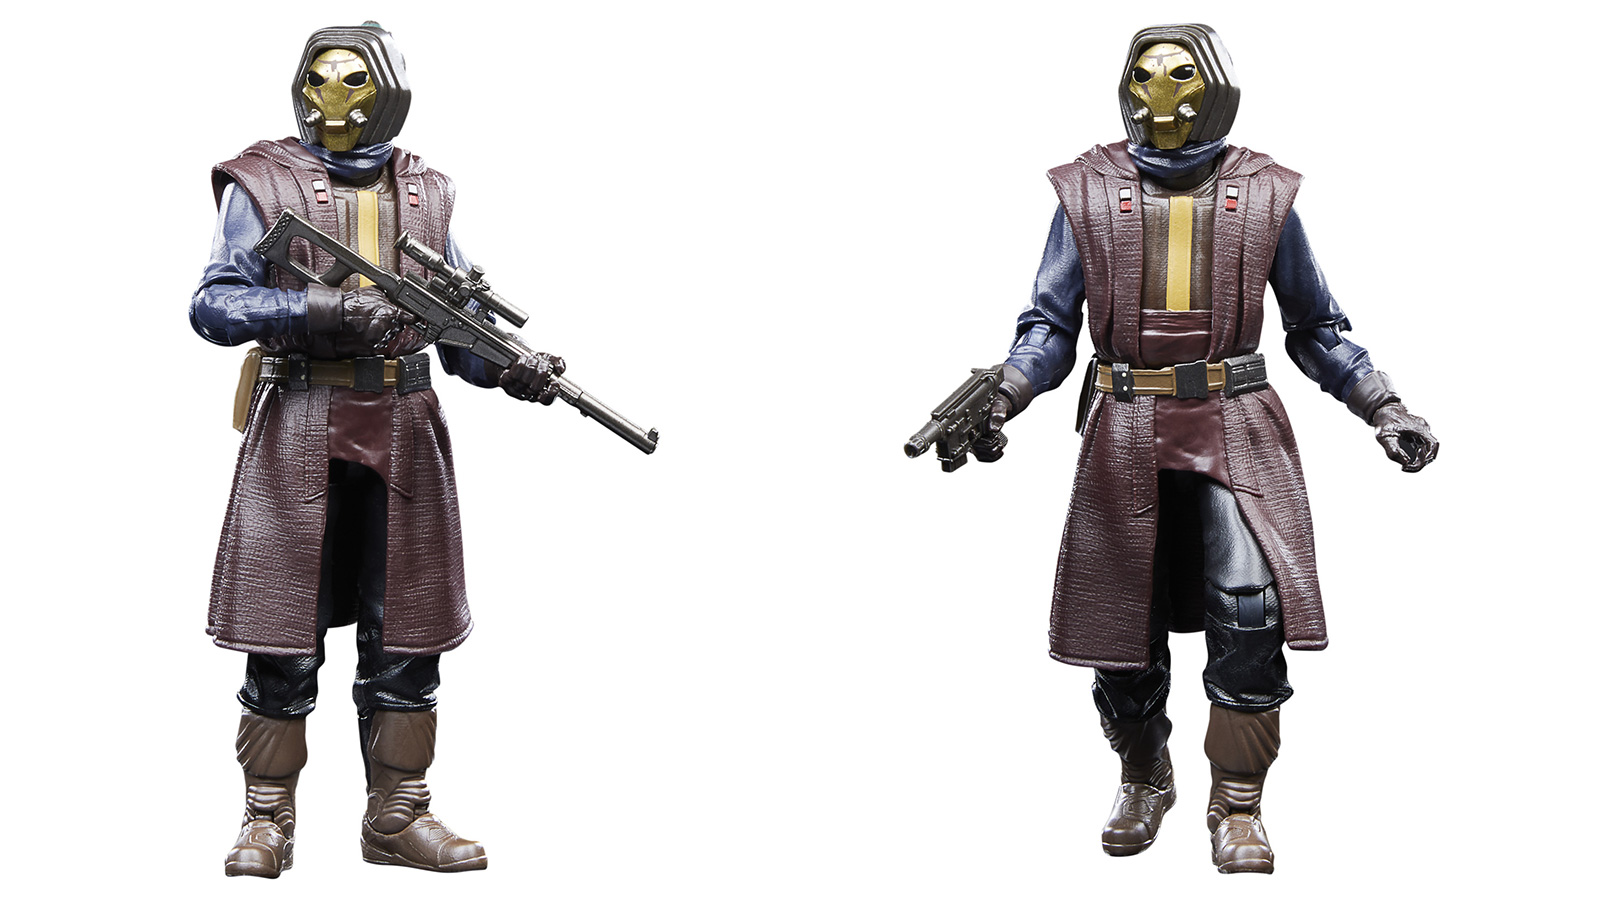 Hasbro Press Release - The Black Series 6-Inch Pyke Soldier